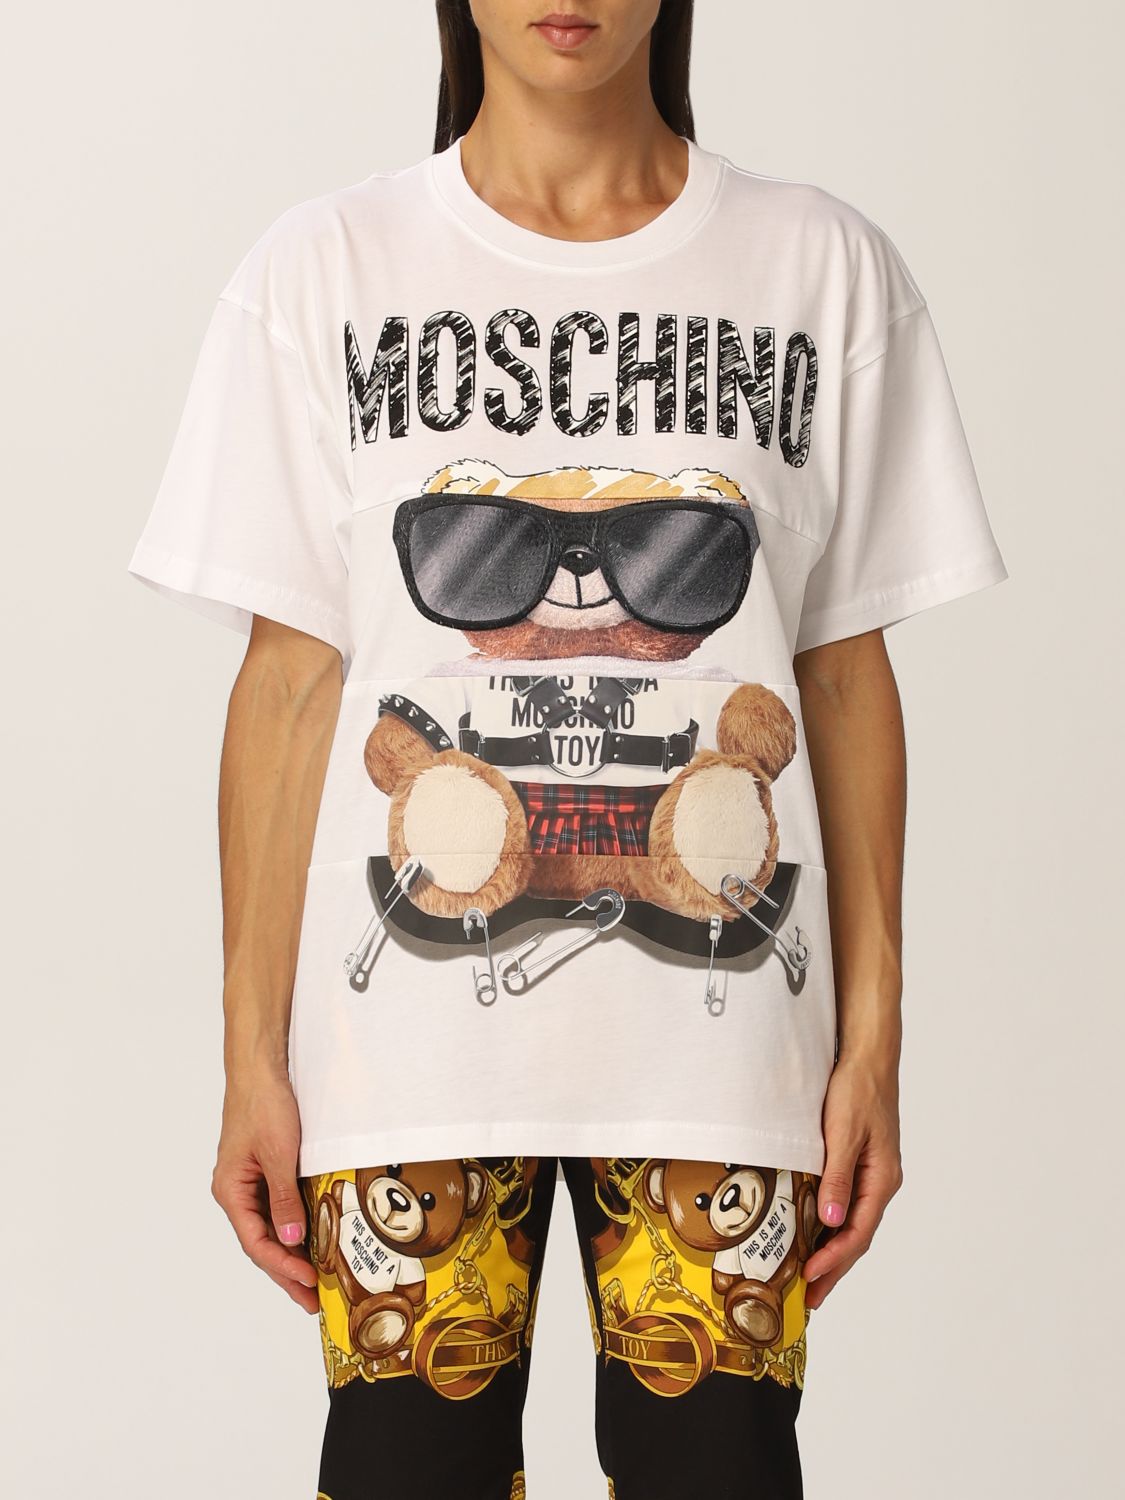 moschino couture Off 63% - www.loverethymno.com